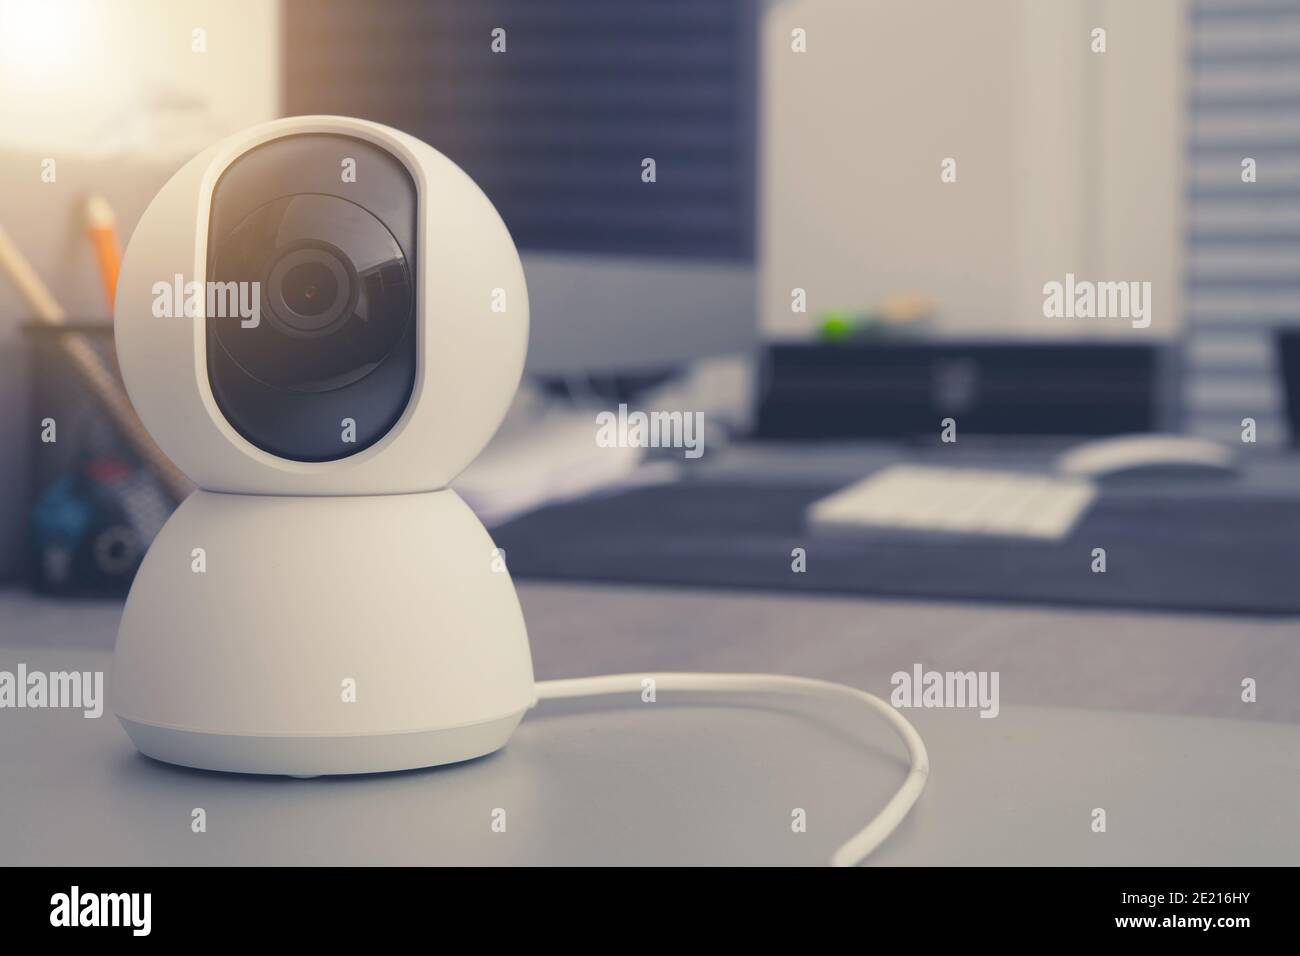 Small Modern Office Webcam For Live Streaming Meetings While Working From Home. Corporate and Technologies Theme. Stock Photo